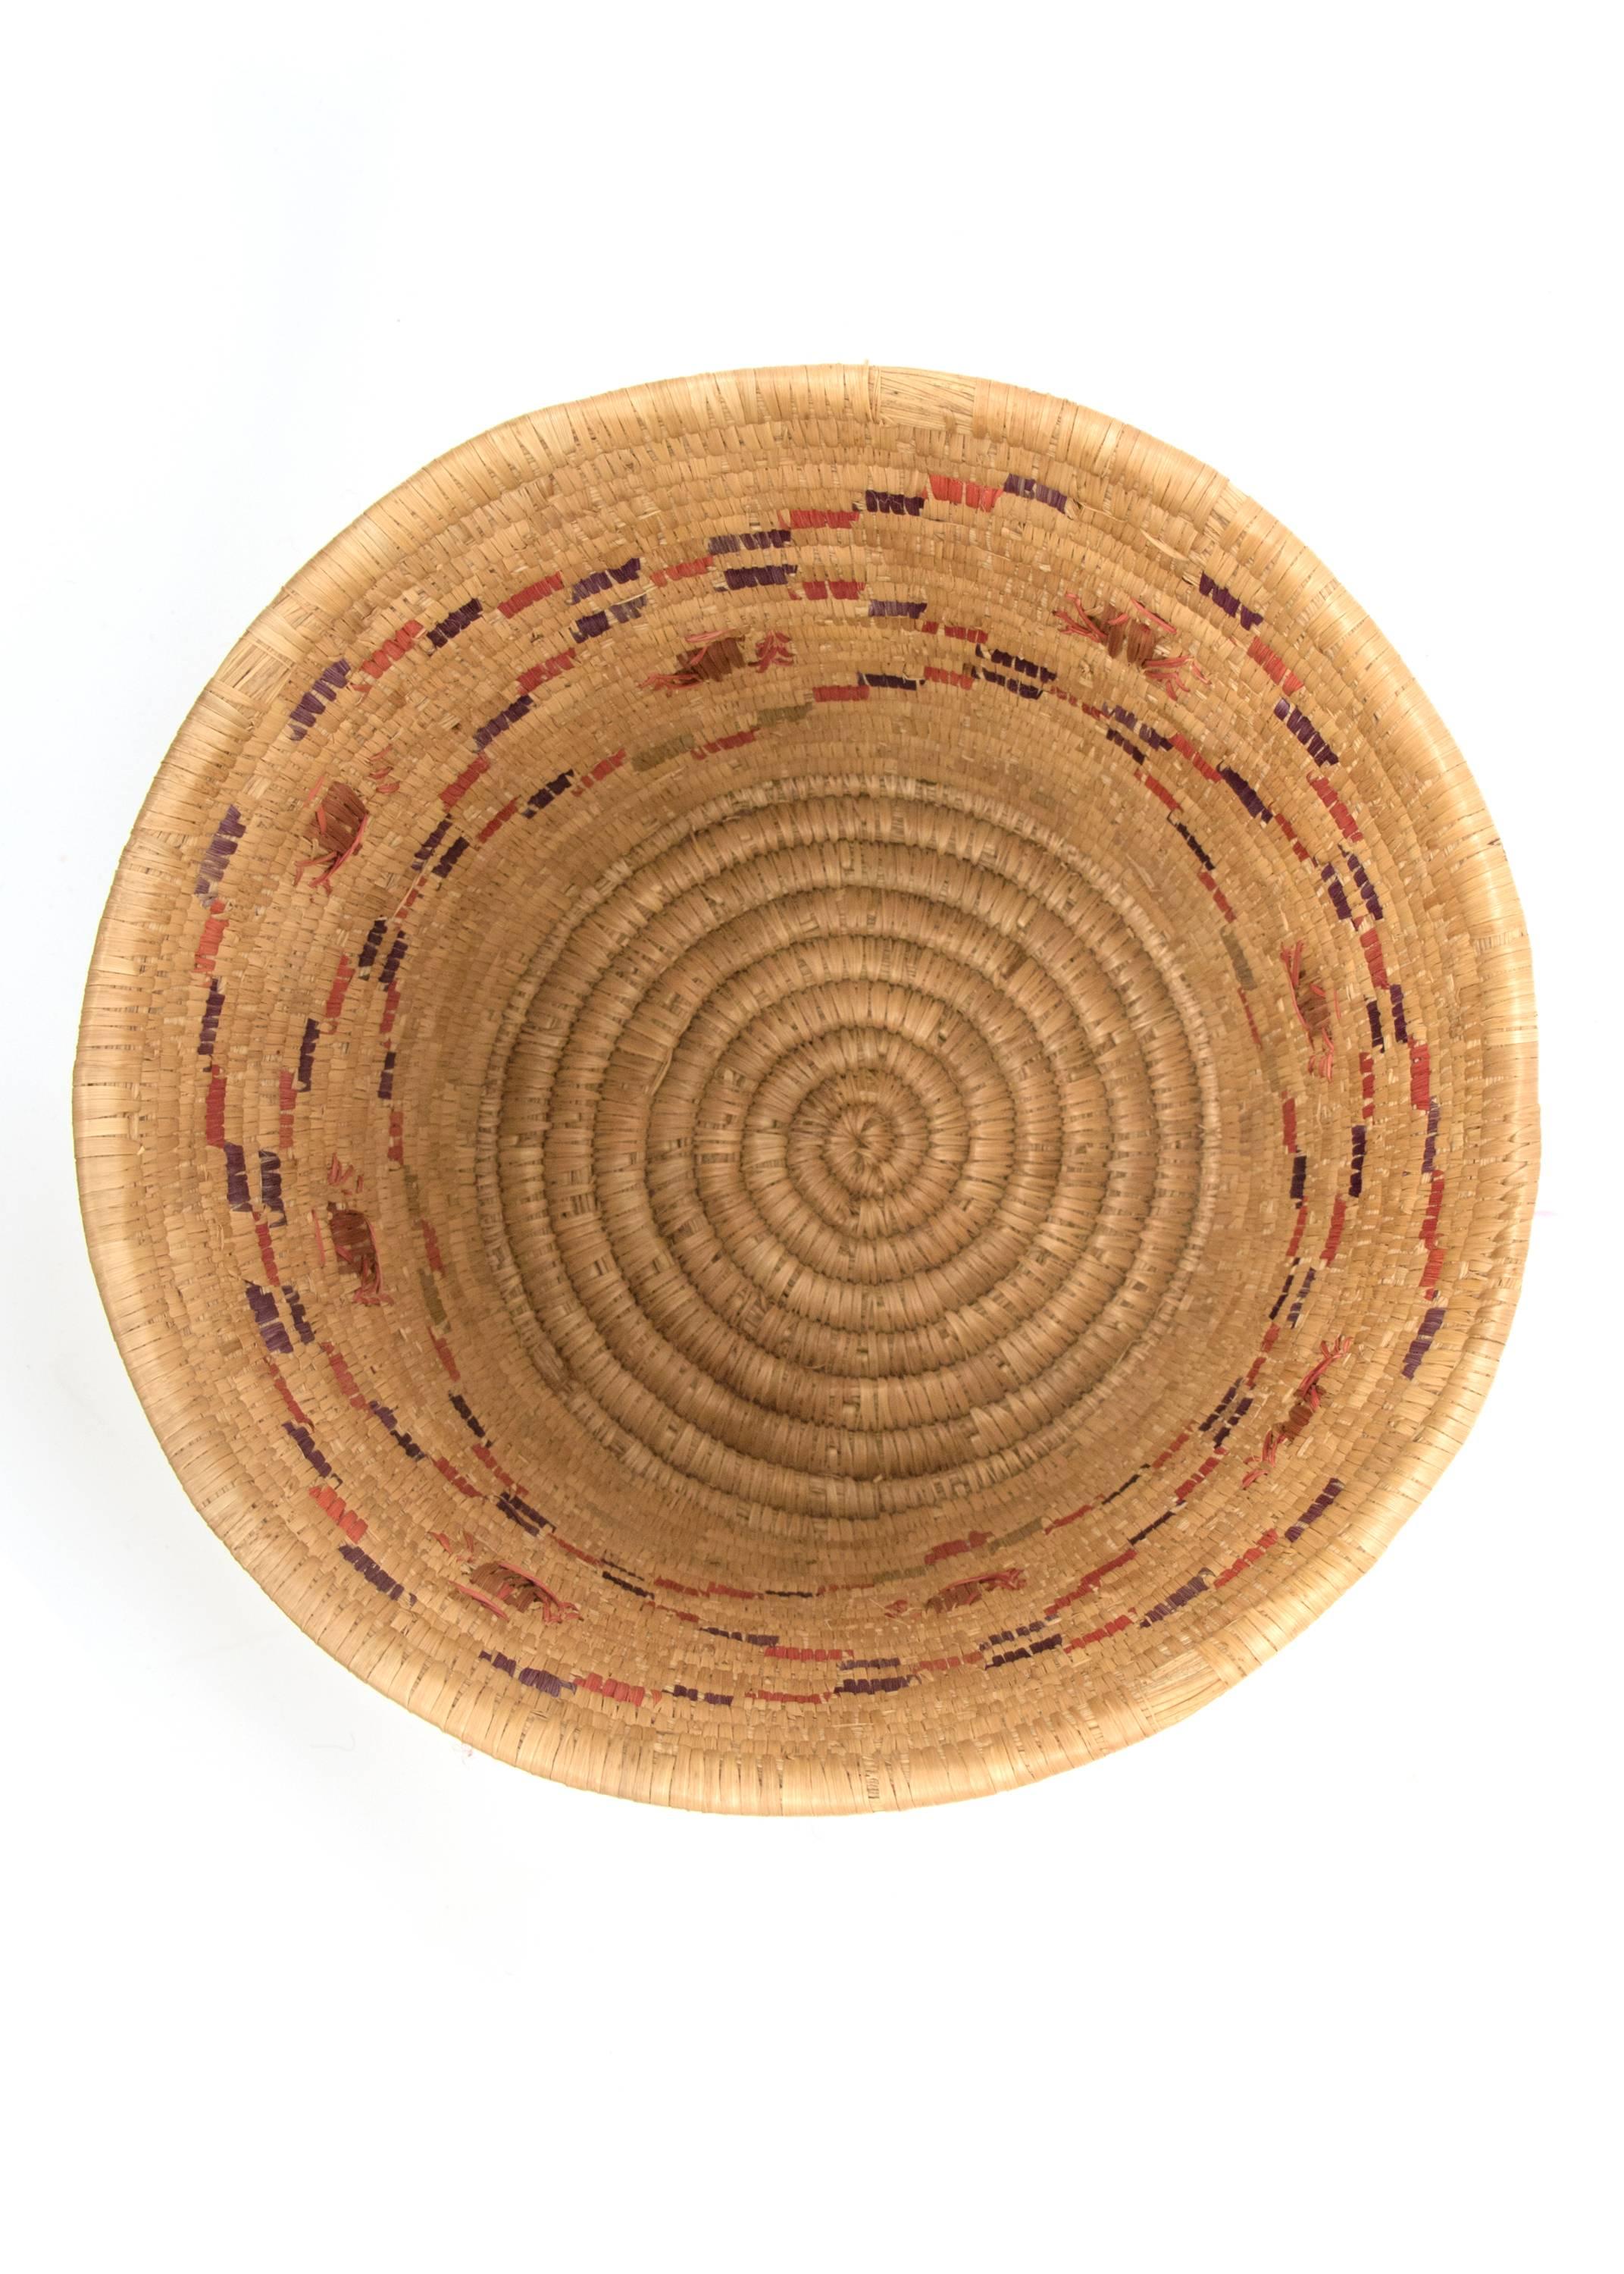 Inuit/Eskimo Pictorial Polychrome basket, first quarter of the 20th century.

Straight sides, bundle coiled with embroider style beetle motifs in brown floating within a lattice design in red and purple.

The Inuit territory includes northern